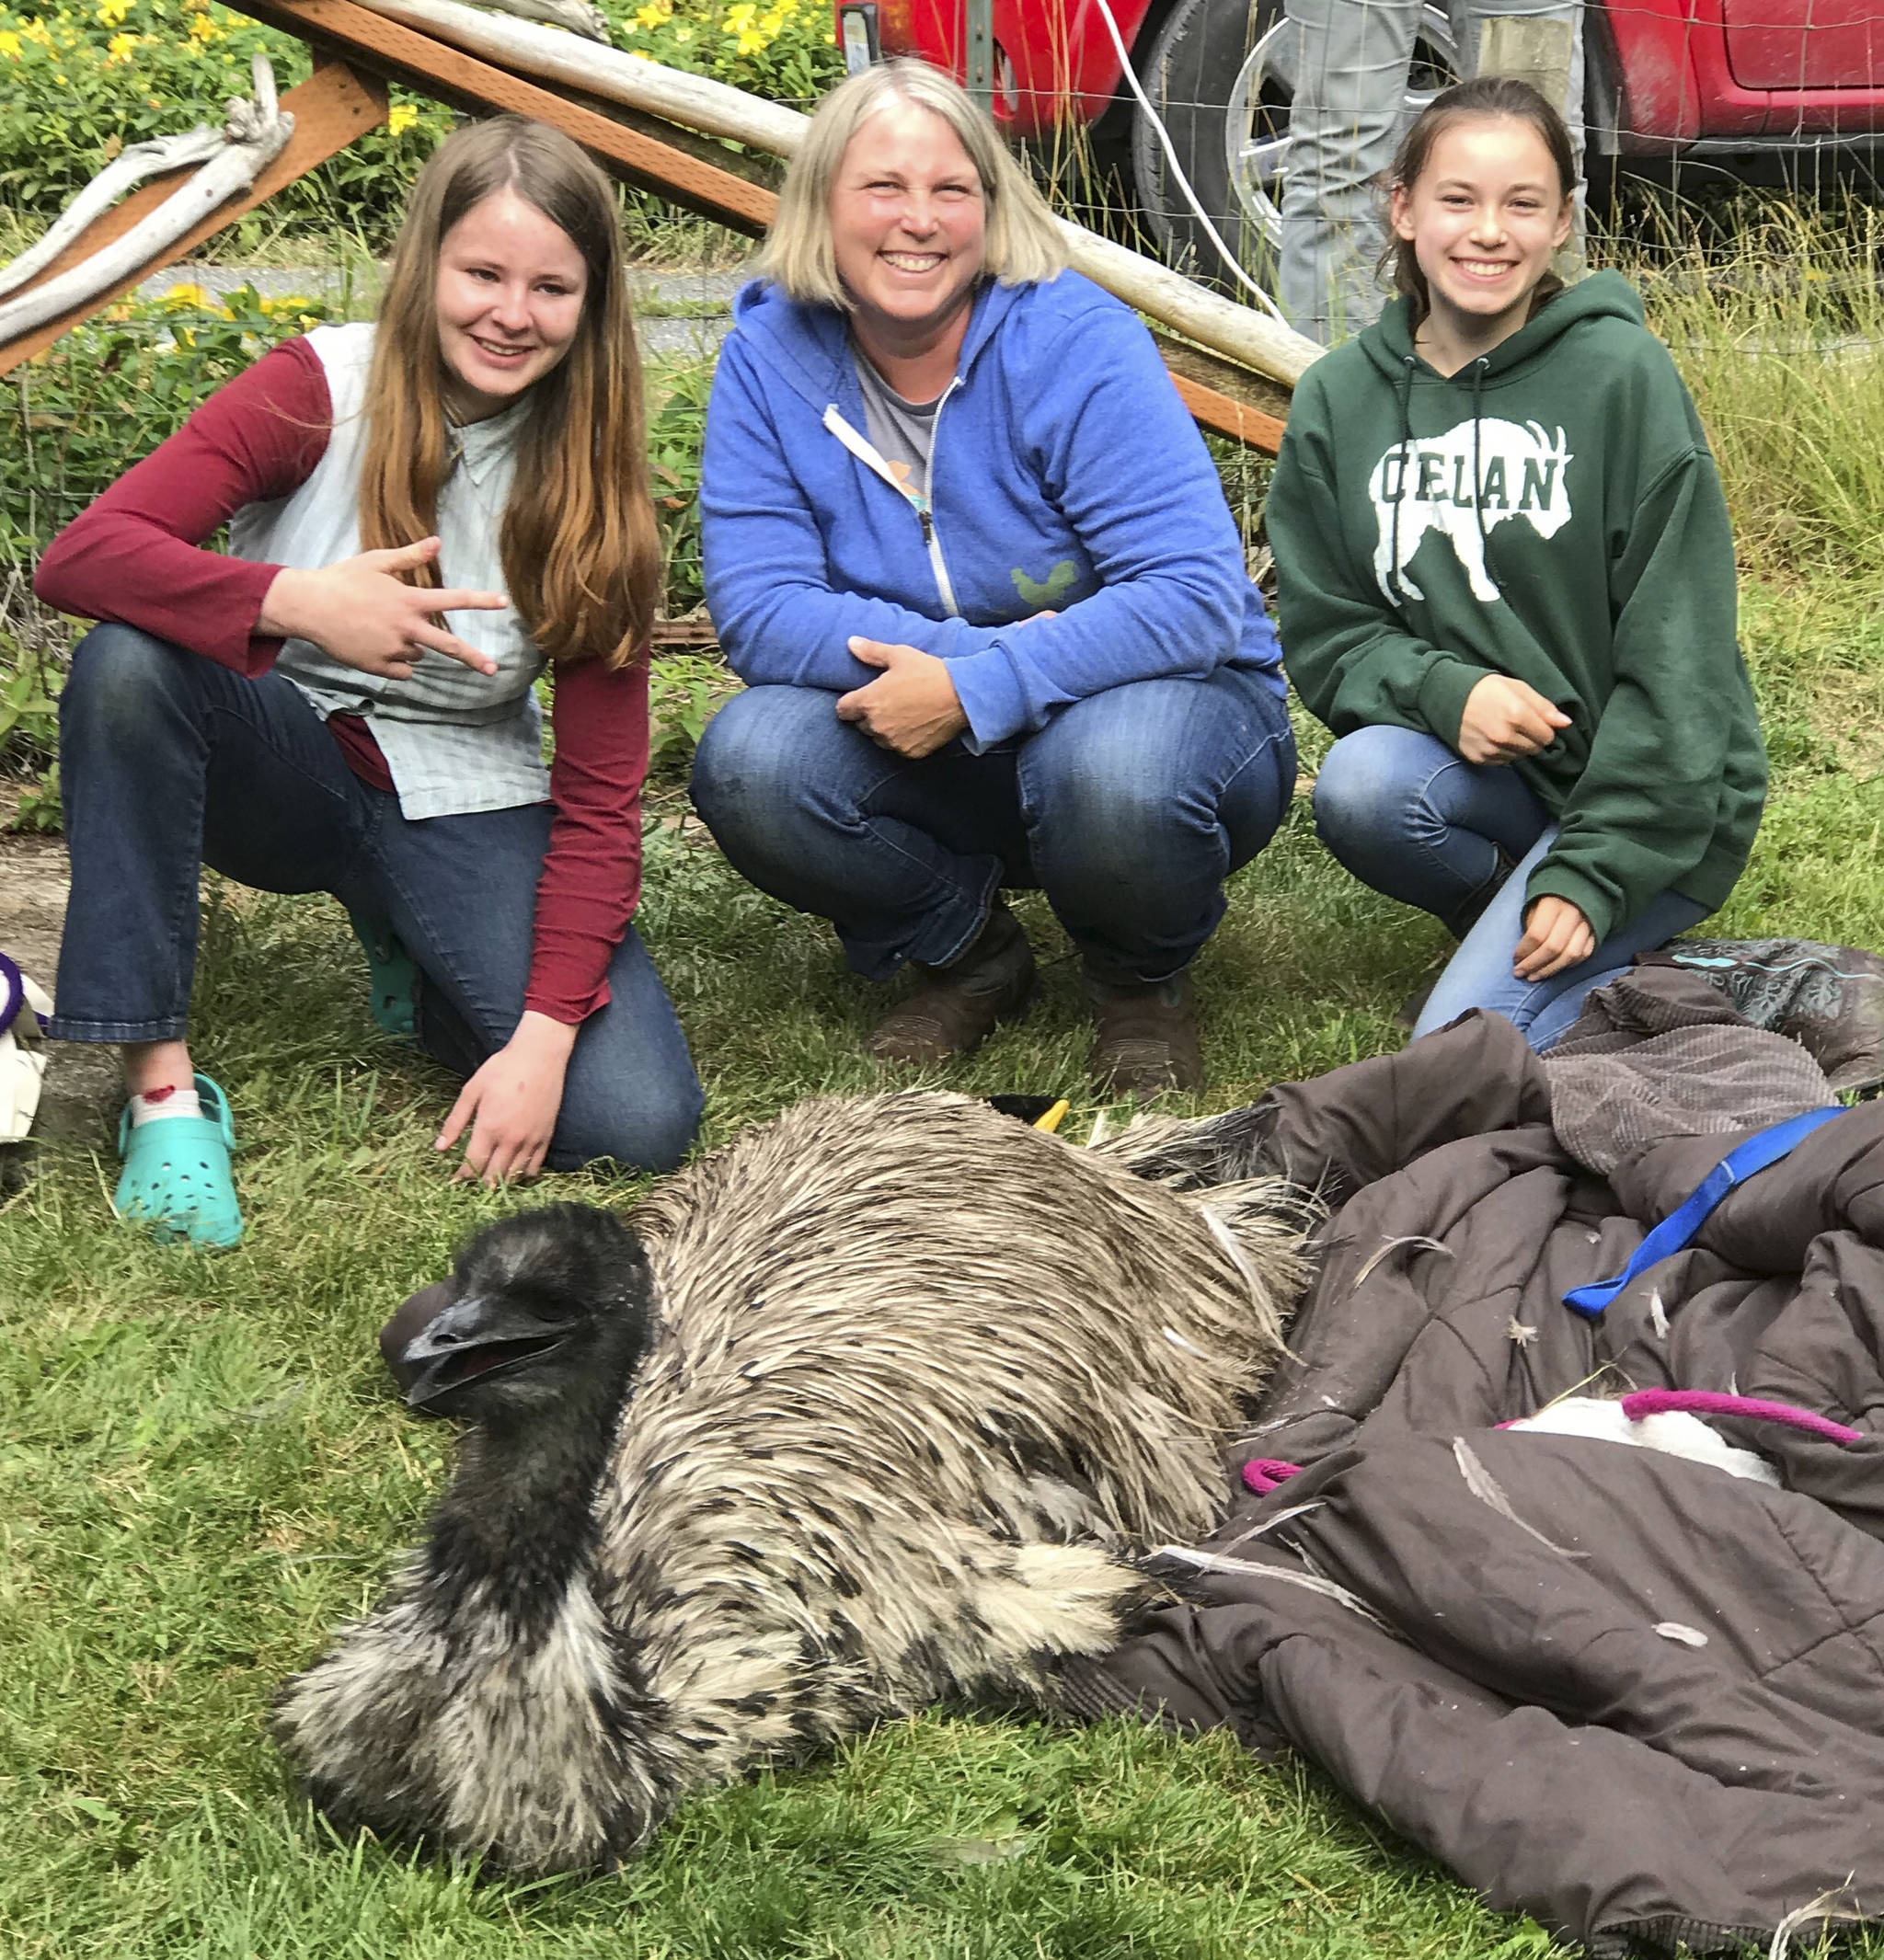 Emalyne Babcock, Amy Lum and Rachel Lum helped rescue Louise the emu on June 27.